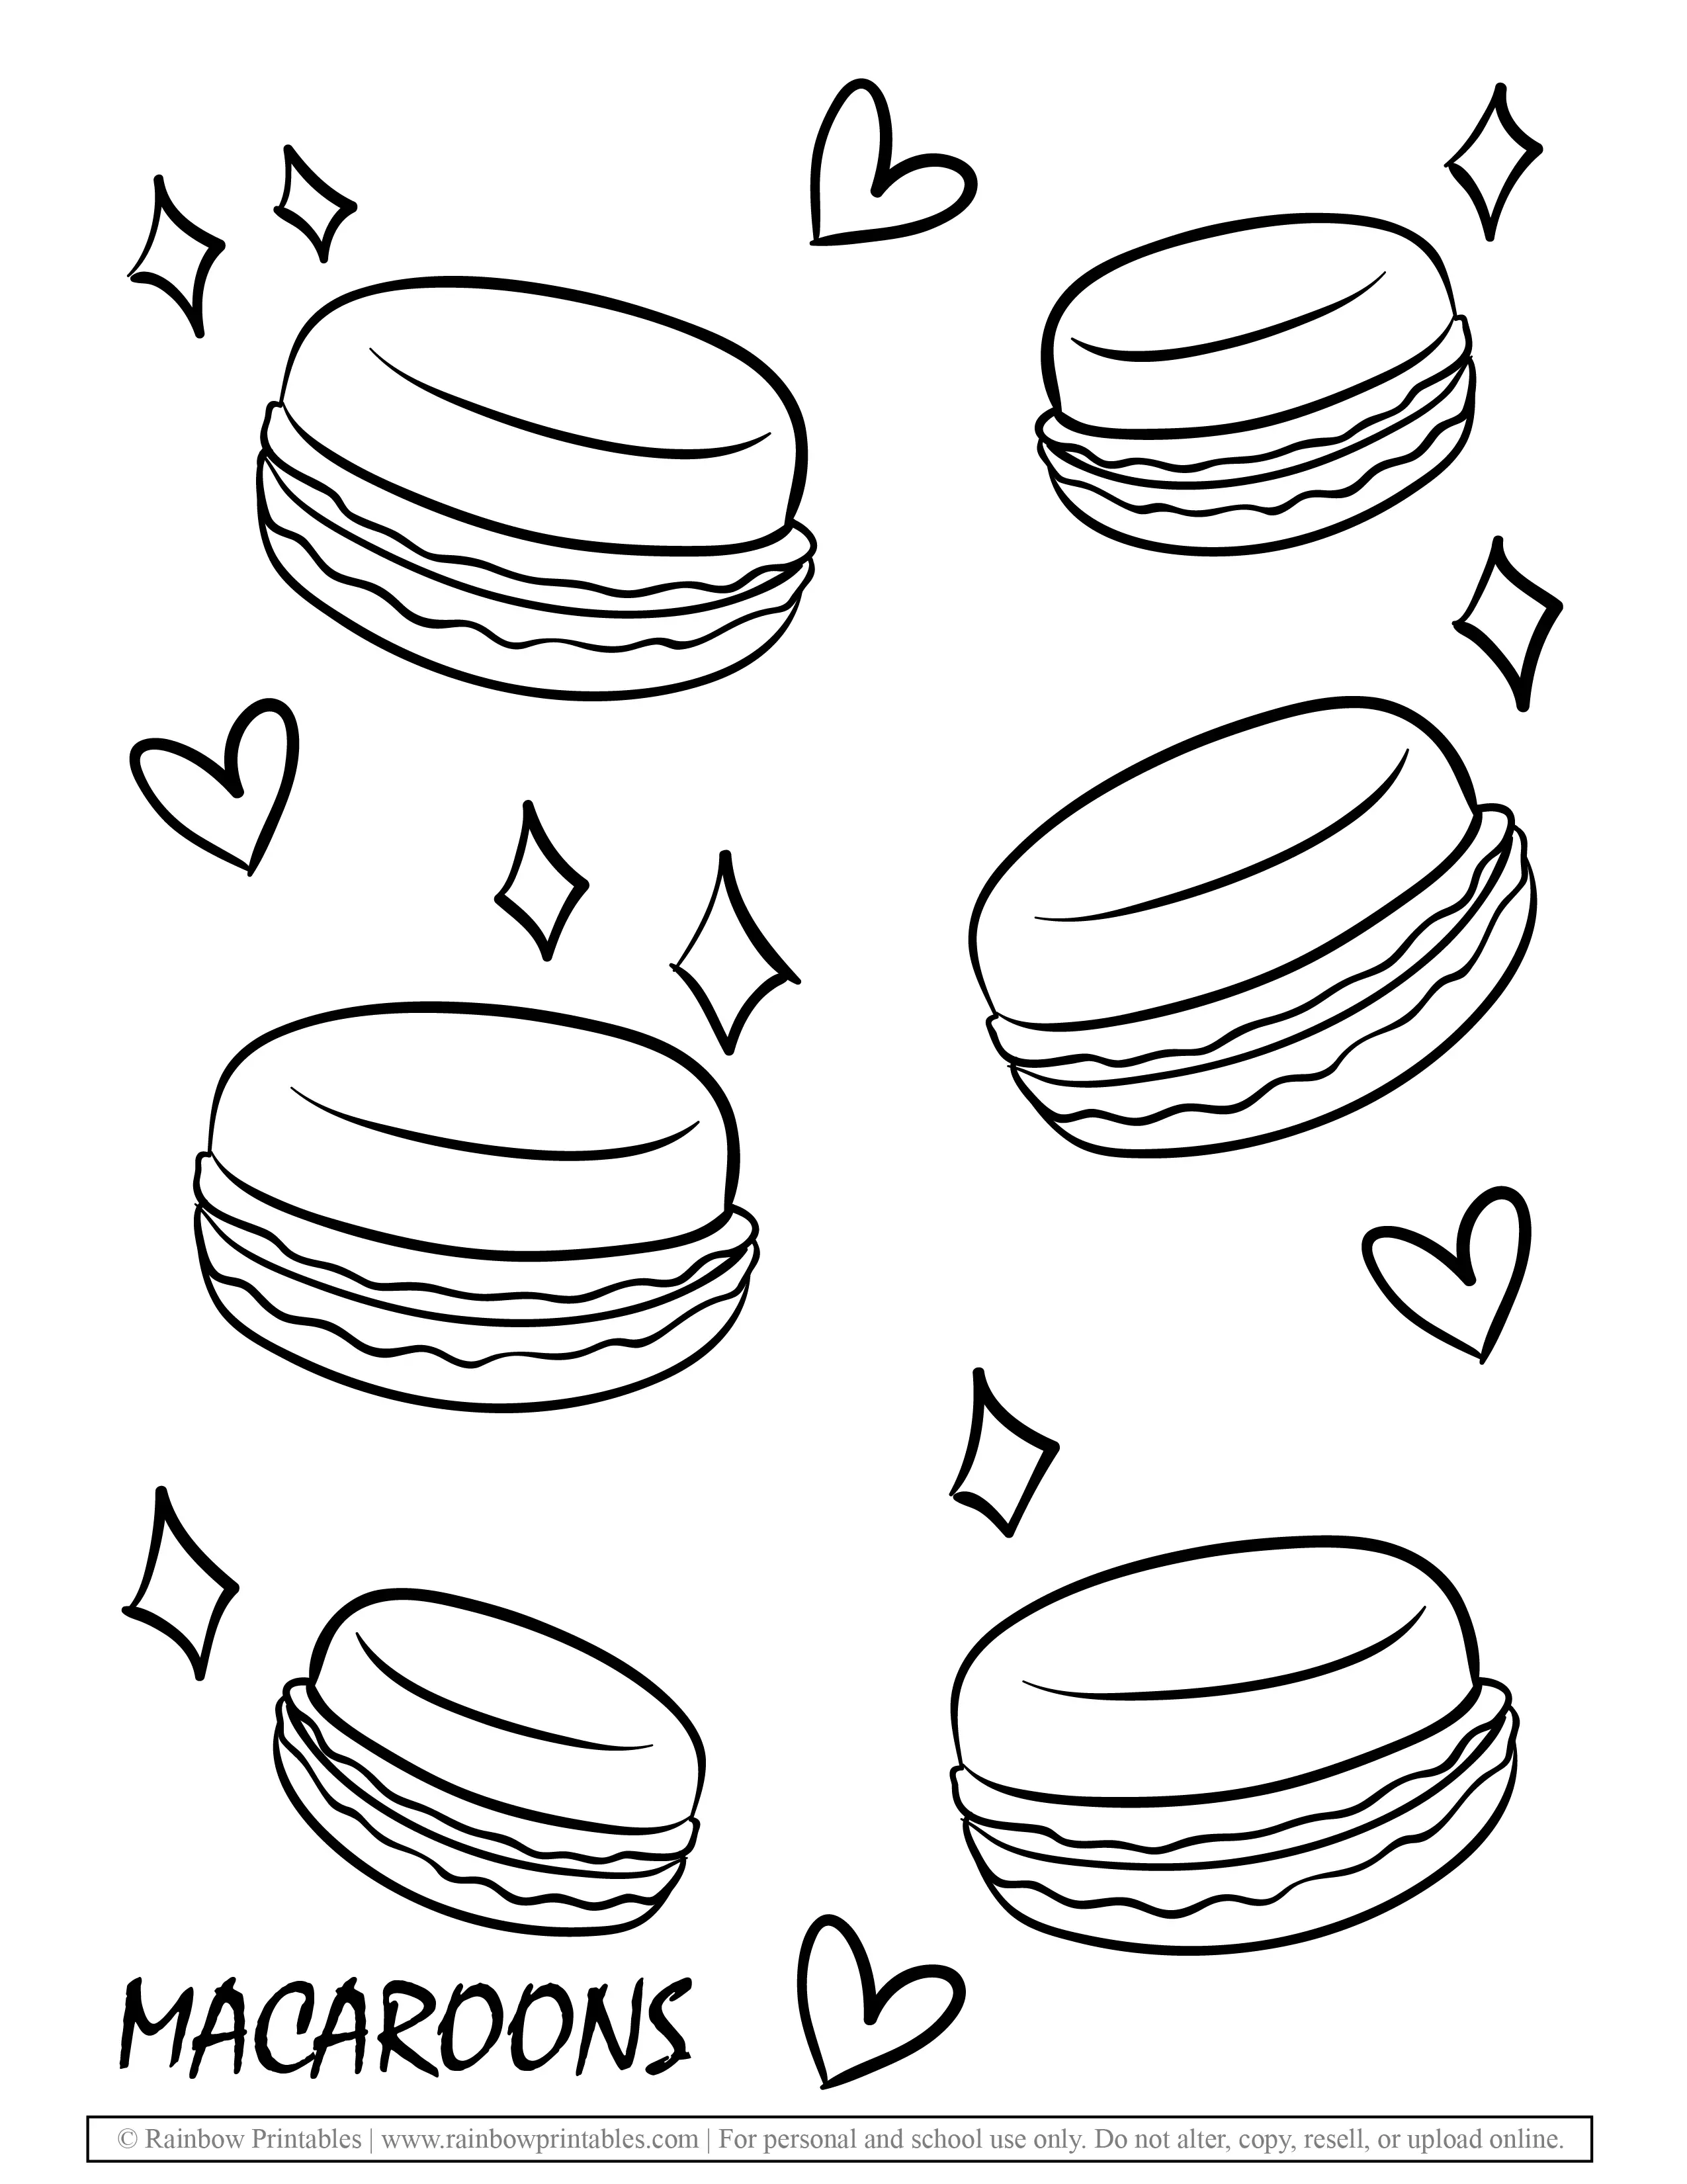 MACAROONS Flavor French Dessert Coloring Pages for Kids Yummy Delicious